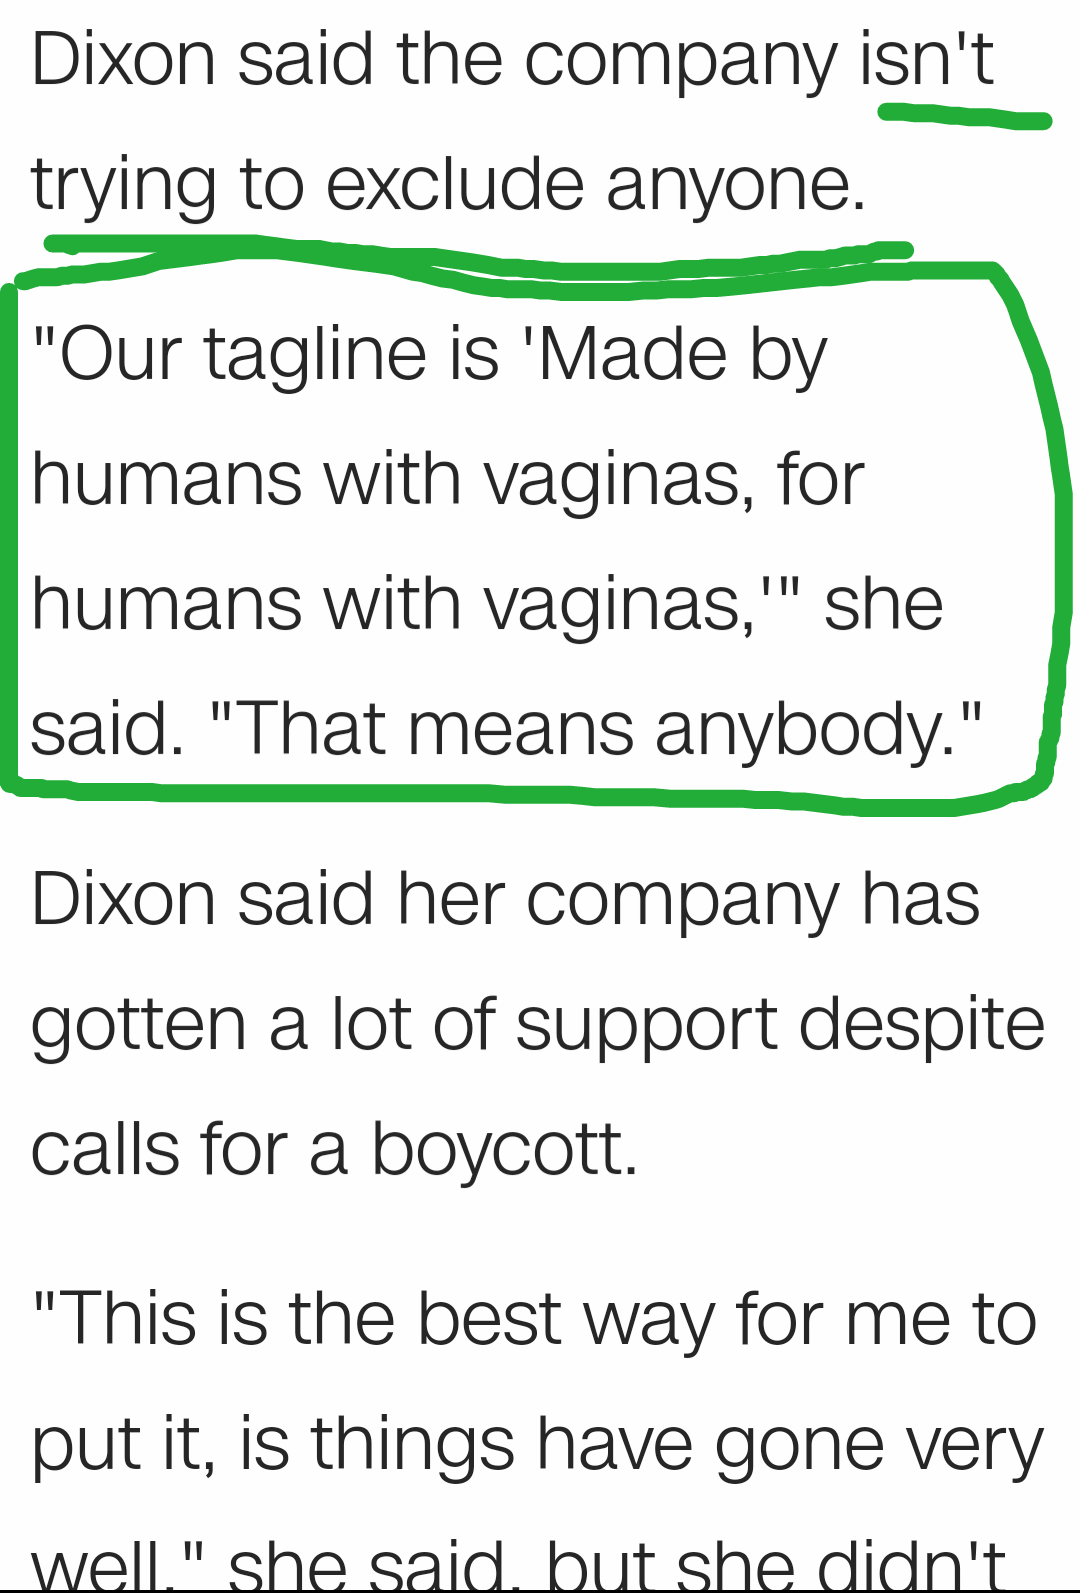 angle - Dixon said the company isn't trying to exclude anyone. "Our tagline is 'Made by humans with vaginas, for humans with vaginas,'" she said. "That means anybody." Til Dixon said her company has gotten a lot of support despite calls for a boycott. "Th